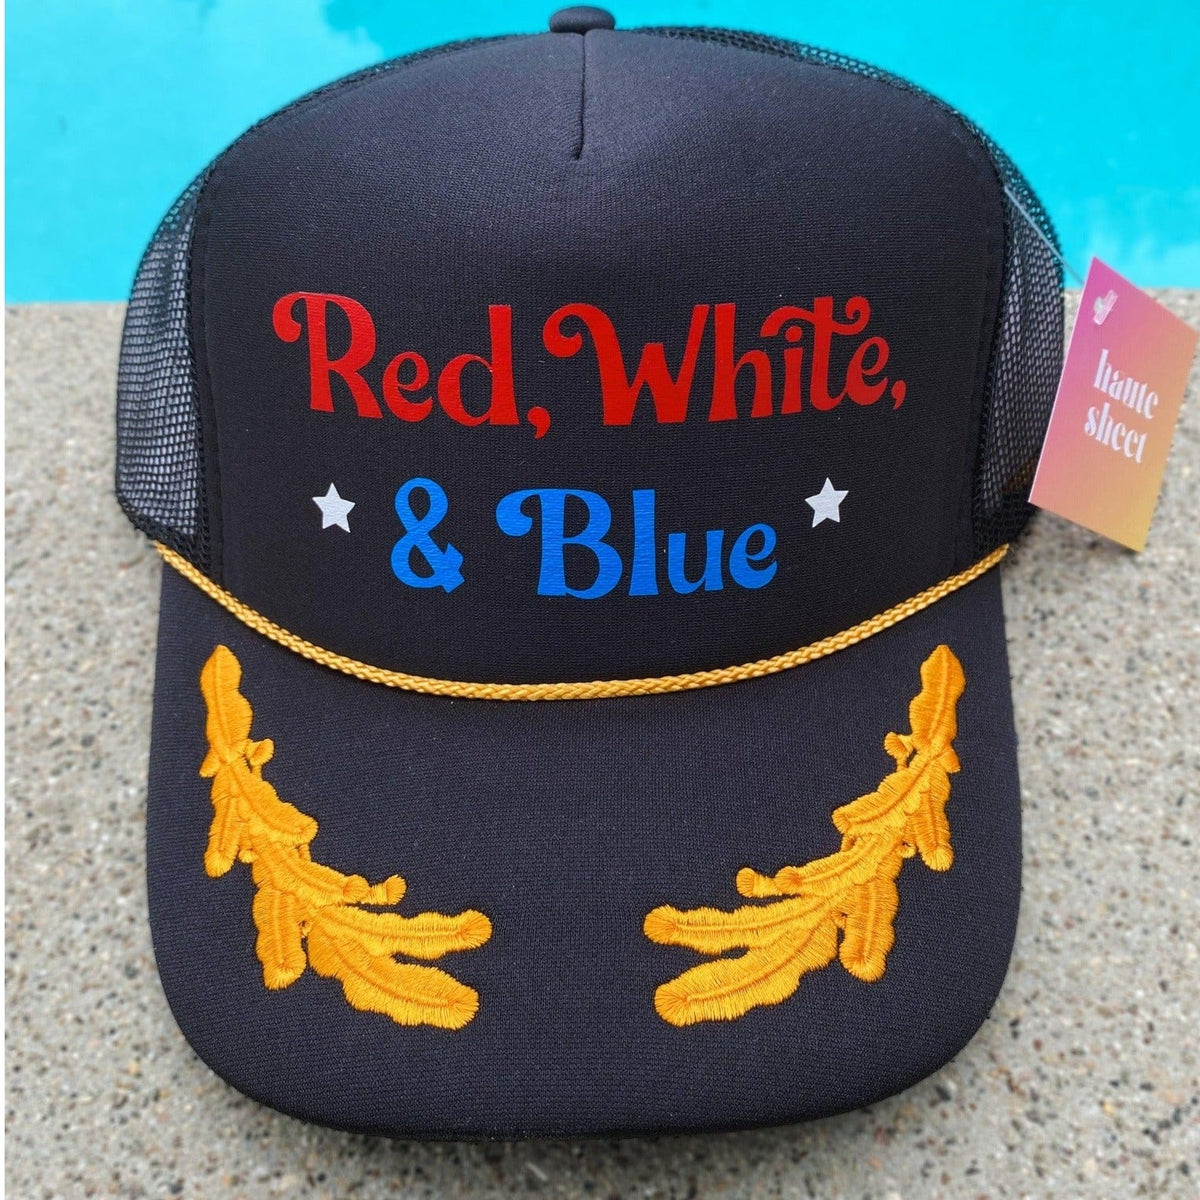 Red, White, & Blue Nautical - Haute Sheet Trucker Hat Hats TheFringeCultureCollective